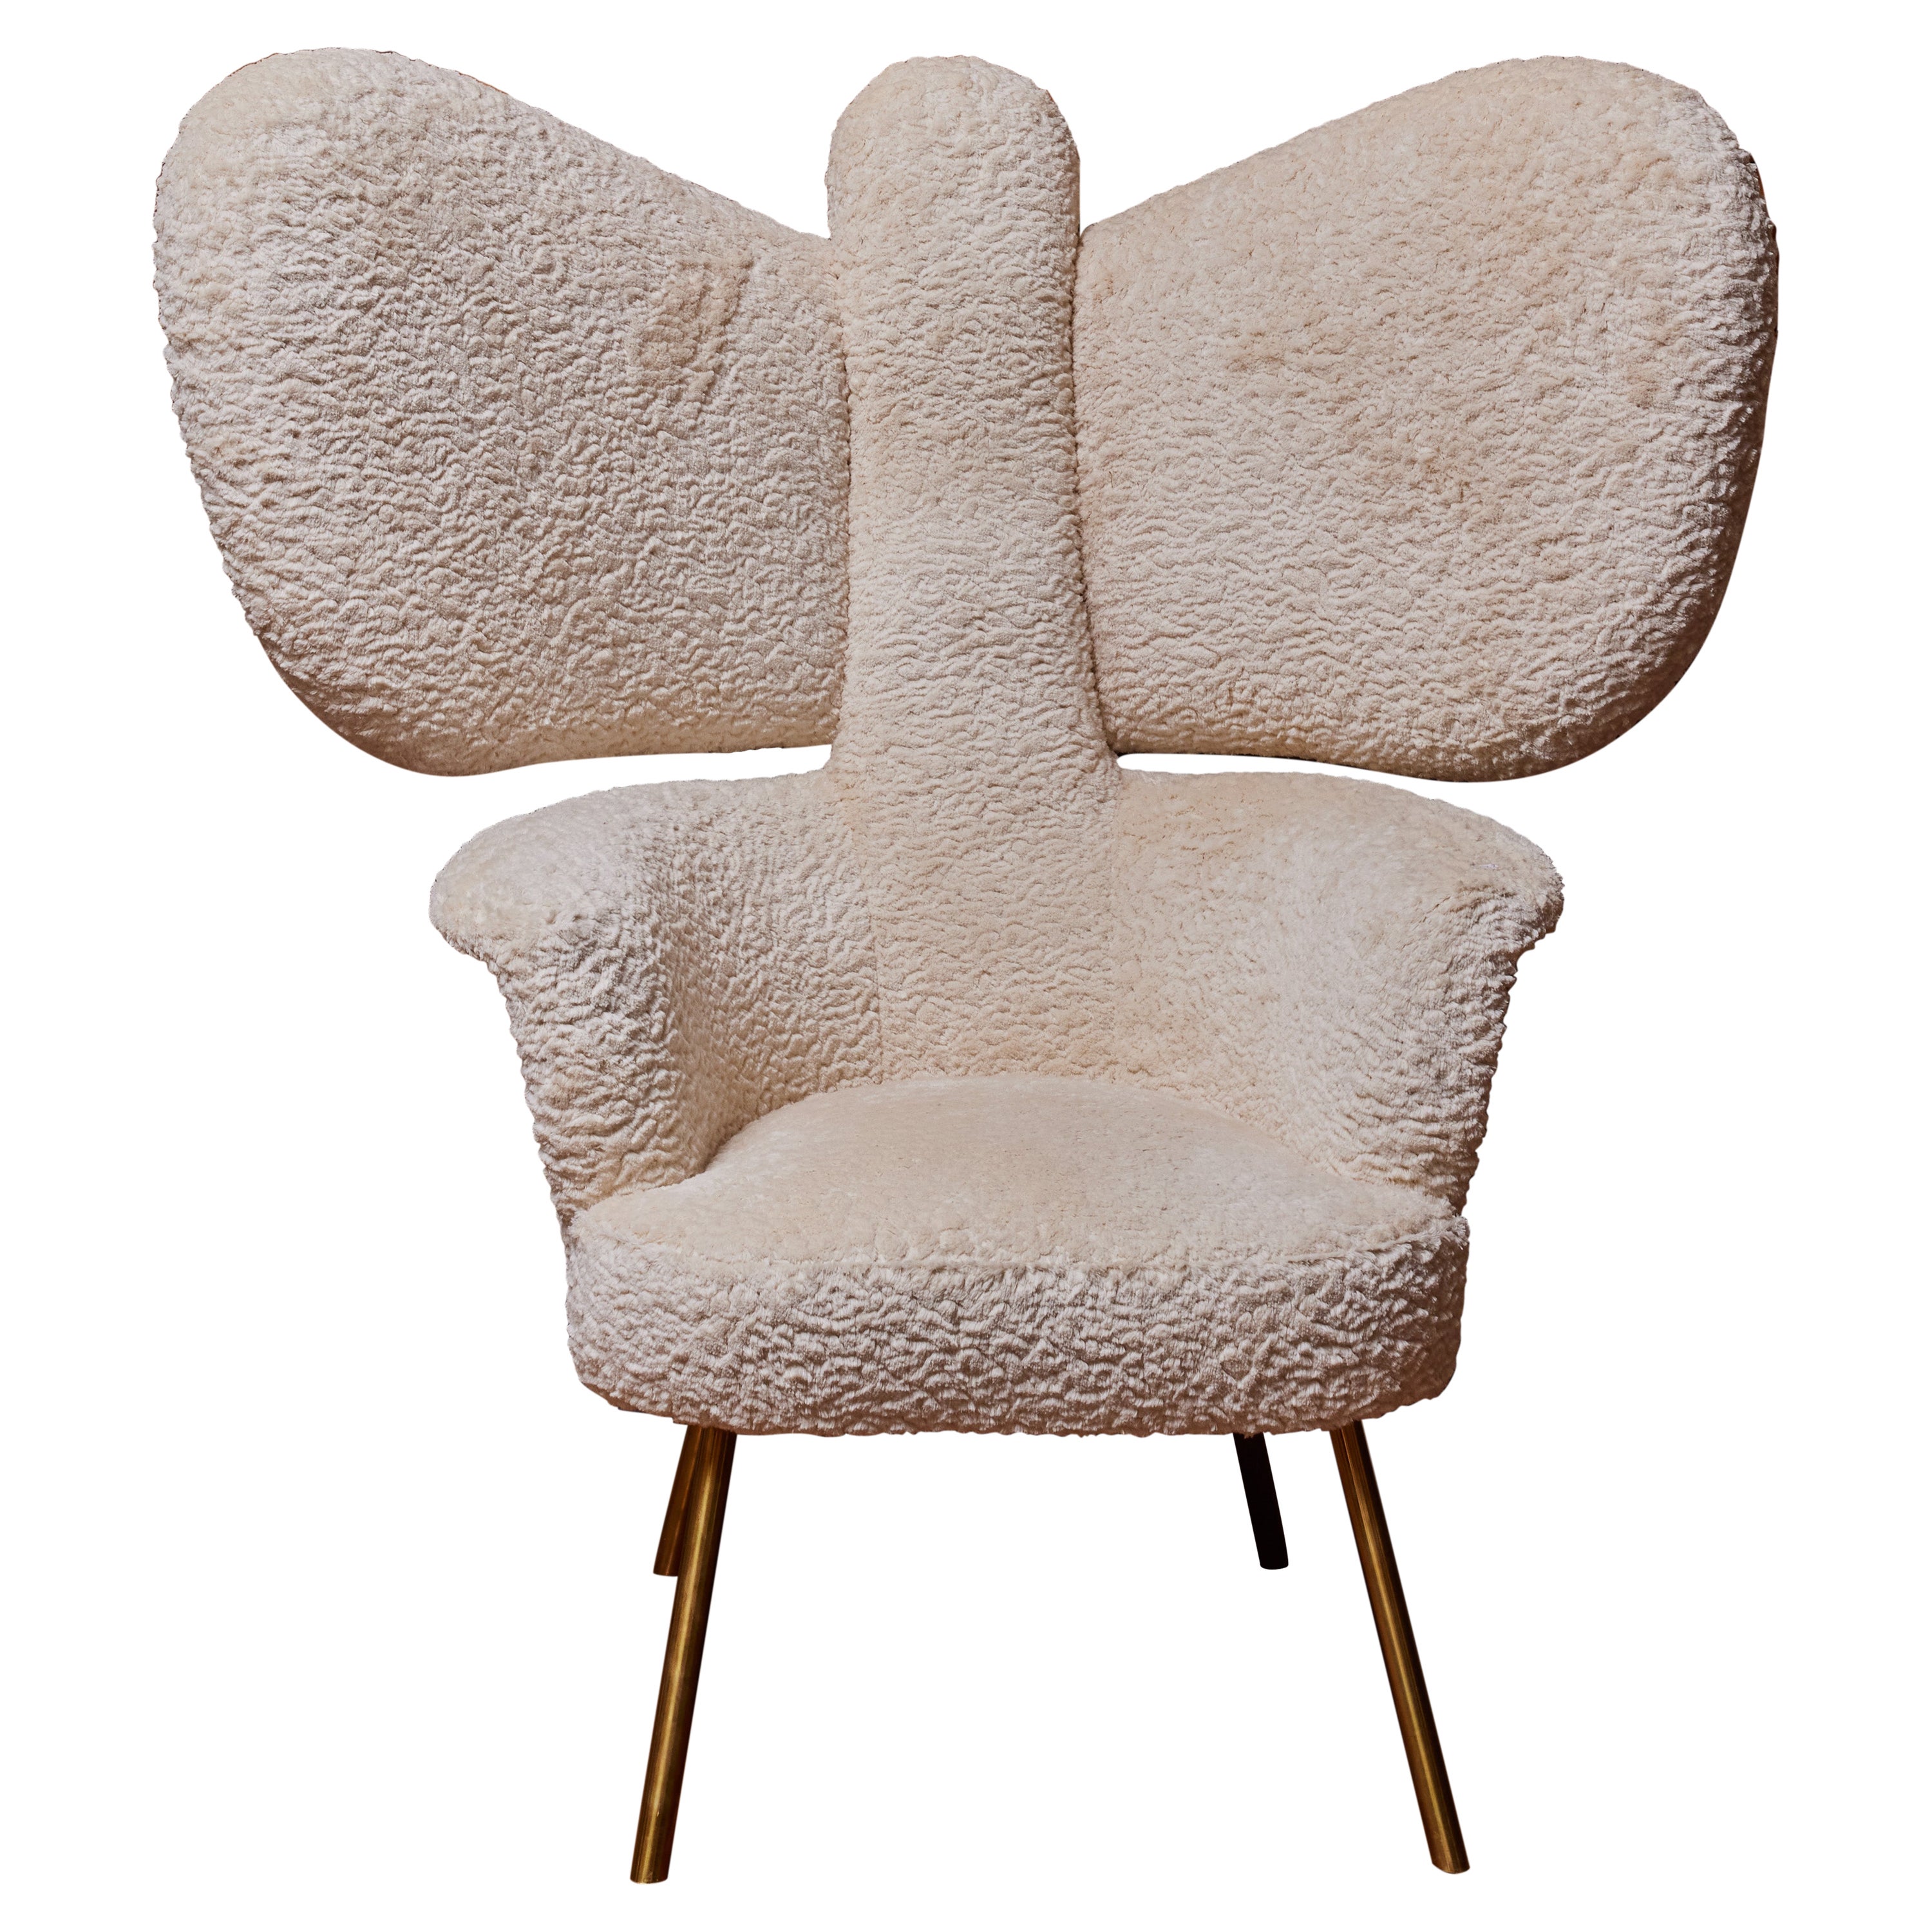 "Butterfly" armchair by Studio Glustin For Sale